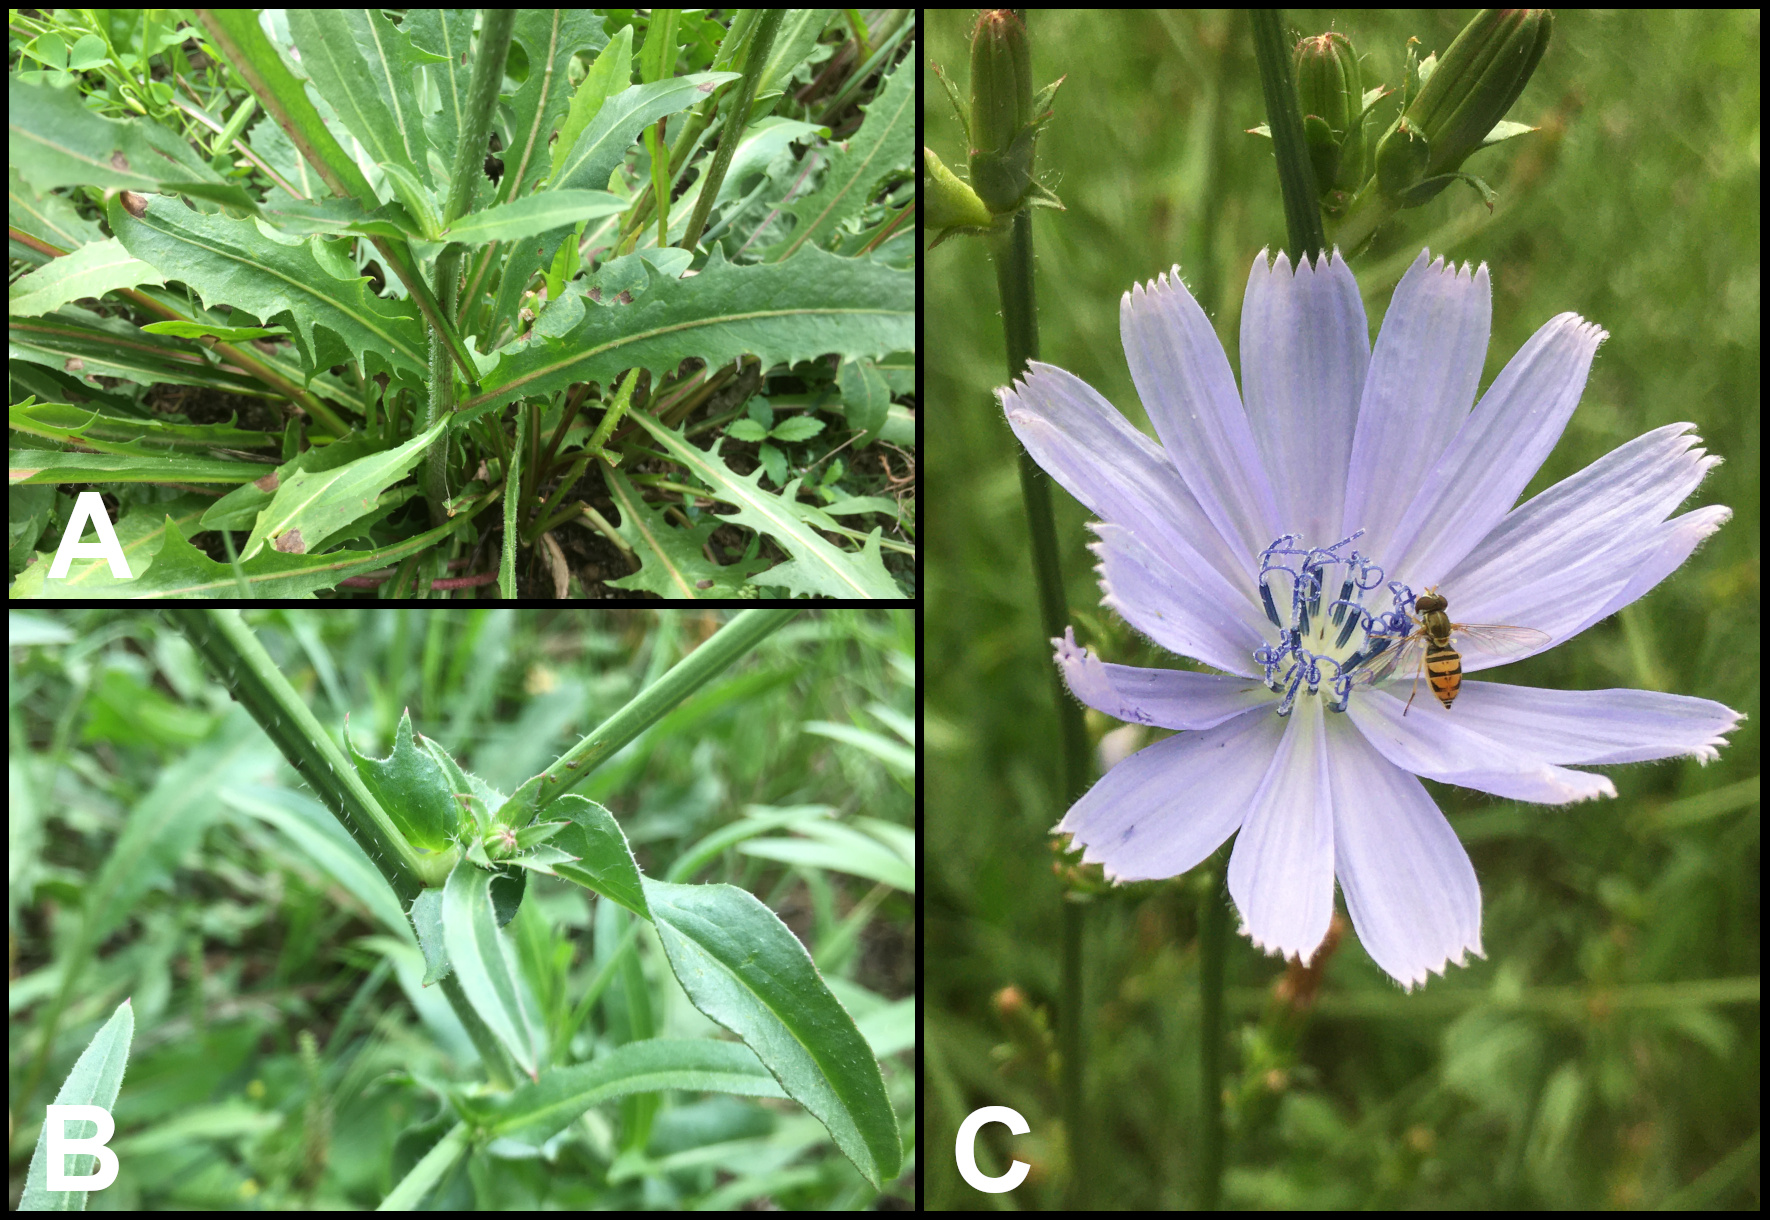 Flowers and leaves of chicory plant.